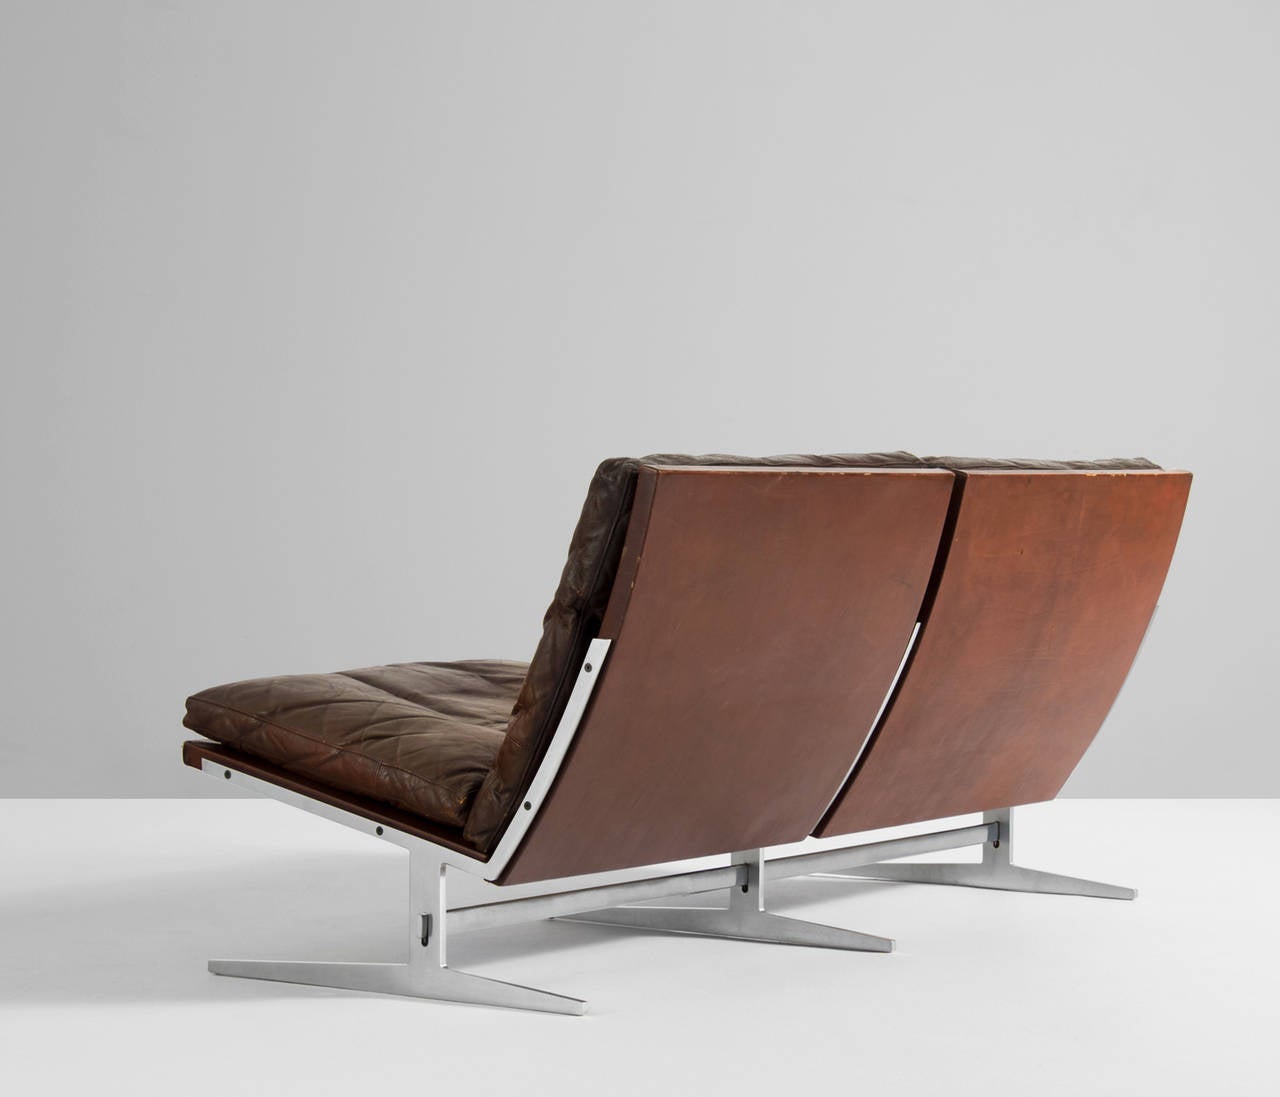 Set of a two seat sofa and accompanying lounge chair by Fabricius and Kastholm for BO EX in a original patinated natural brown leather.

Very tight design with nice brushed steel frame and down filled high quality brown leather cushions which